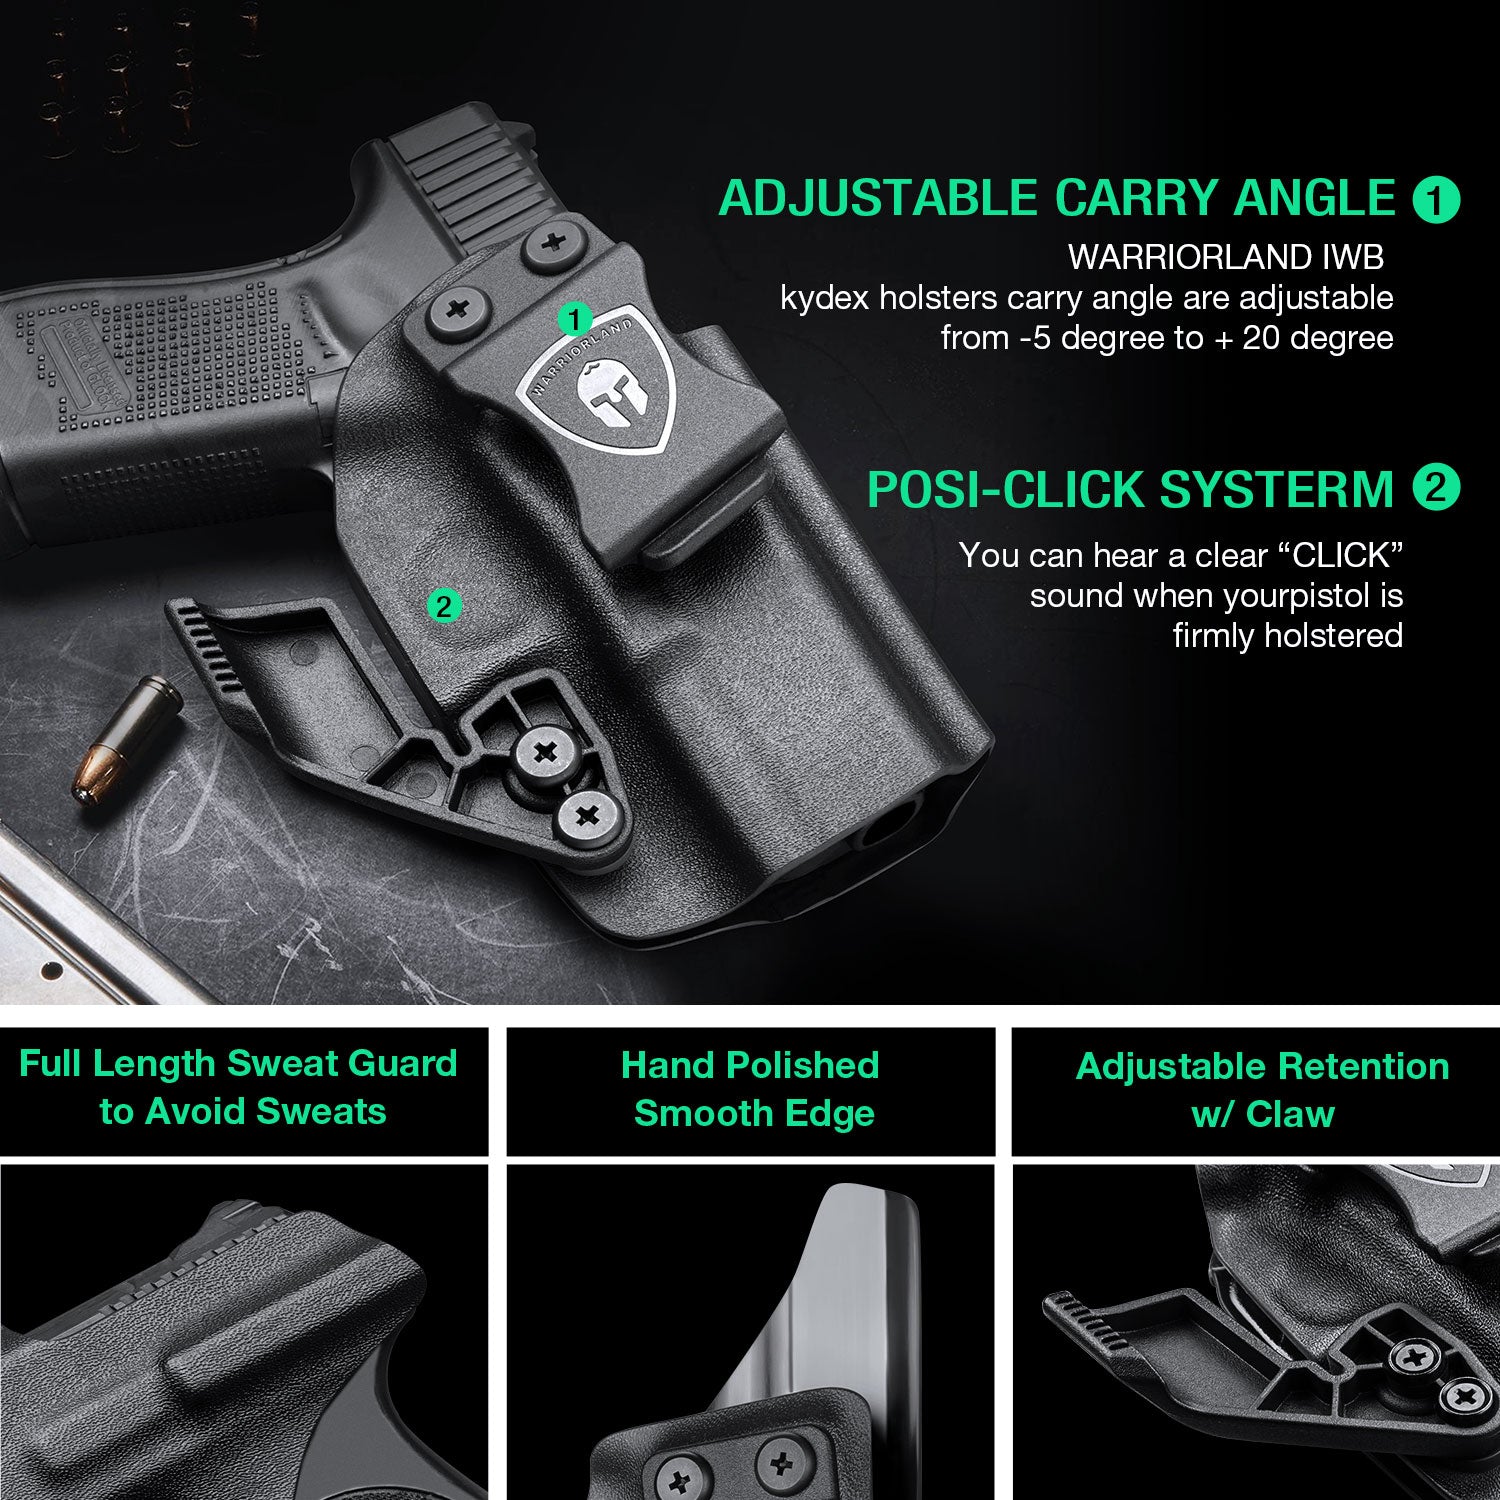 Glock17/19/19X/44/45 Gen(1-5) & Glock 23/32 Gen(3-4) holster with Claw Red Dot Optics Cut Trigger Guard Holsters for Fat Guys | WARRIORLAND